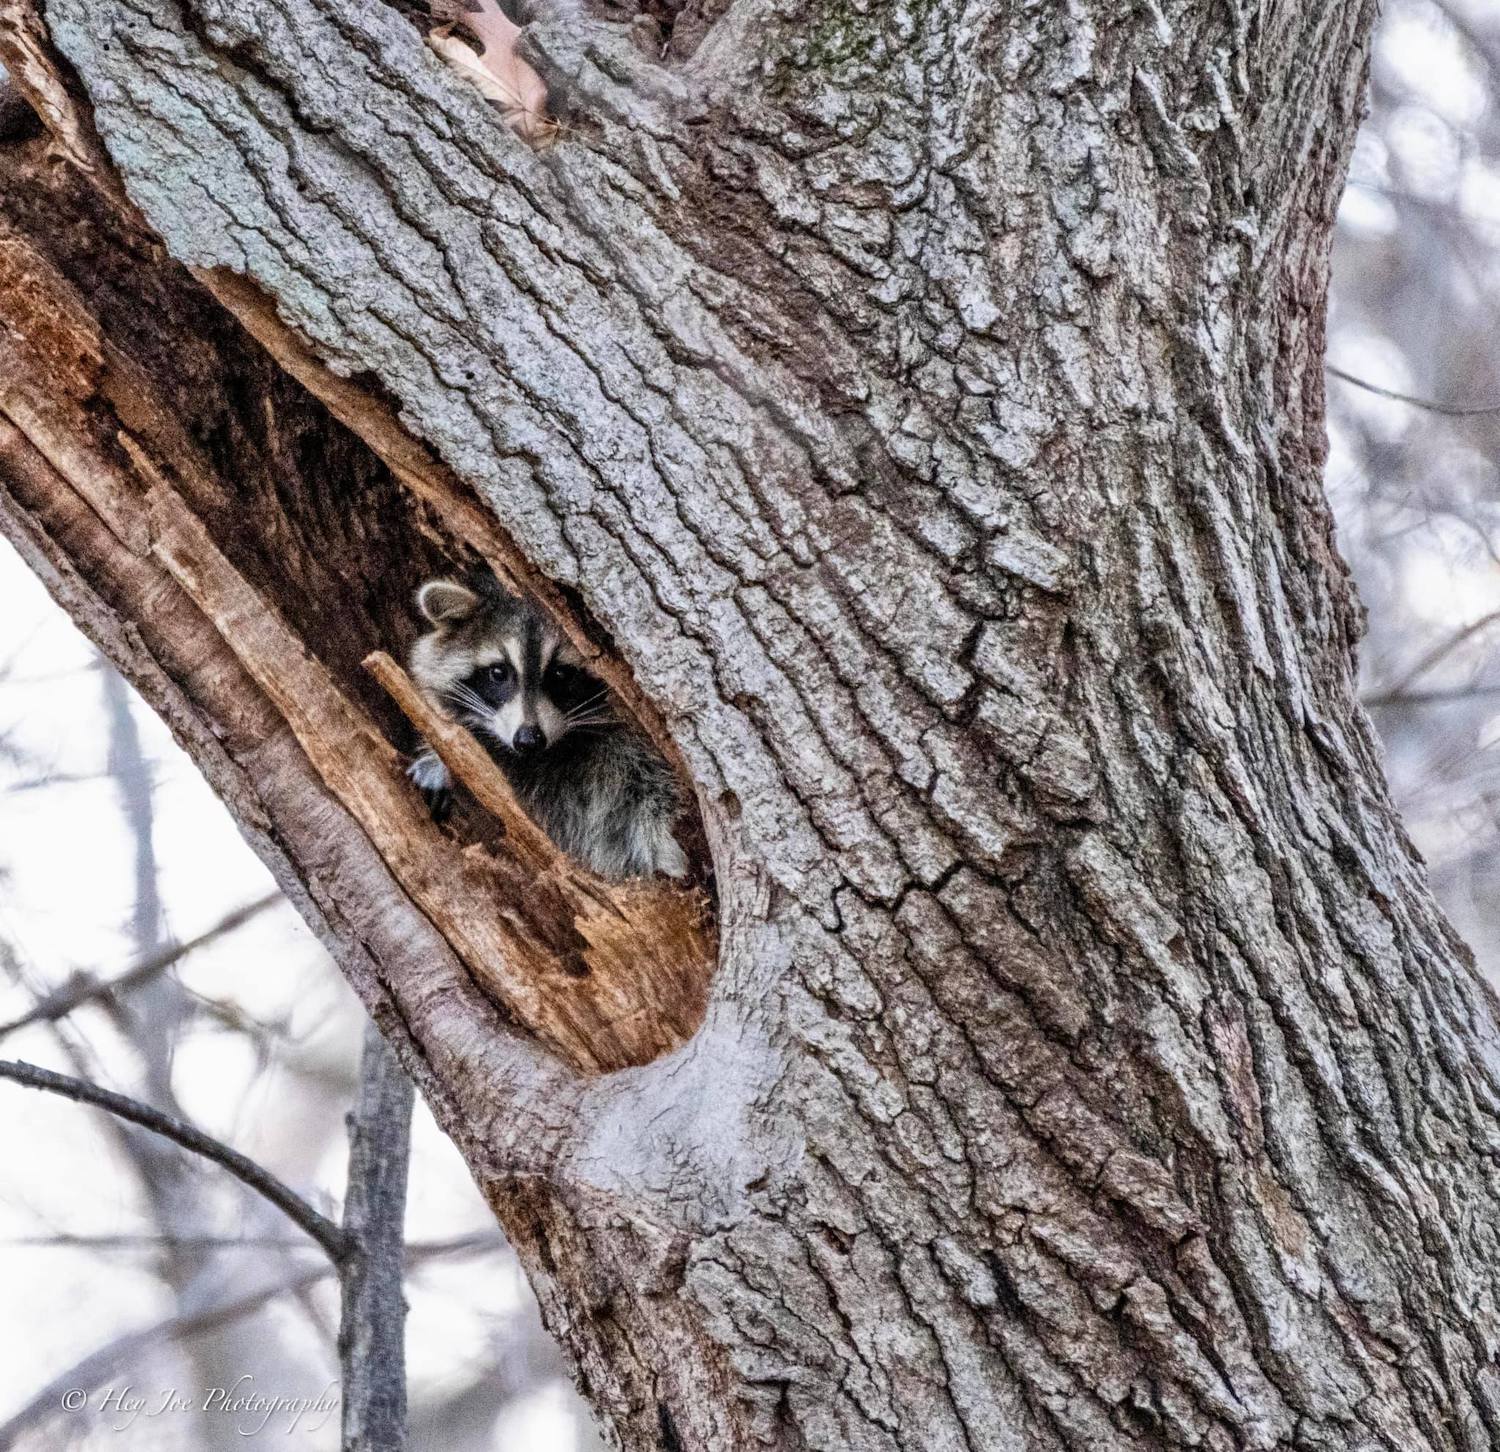 A raccoon peering out from a tree cavity.